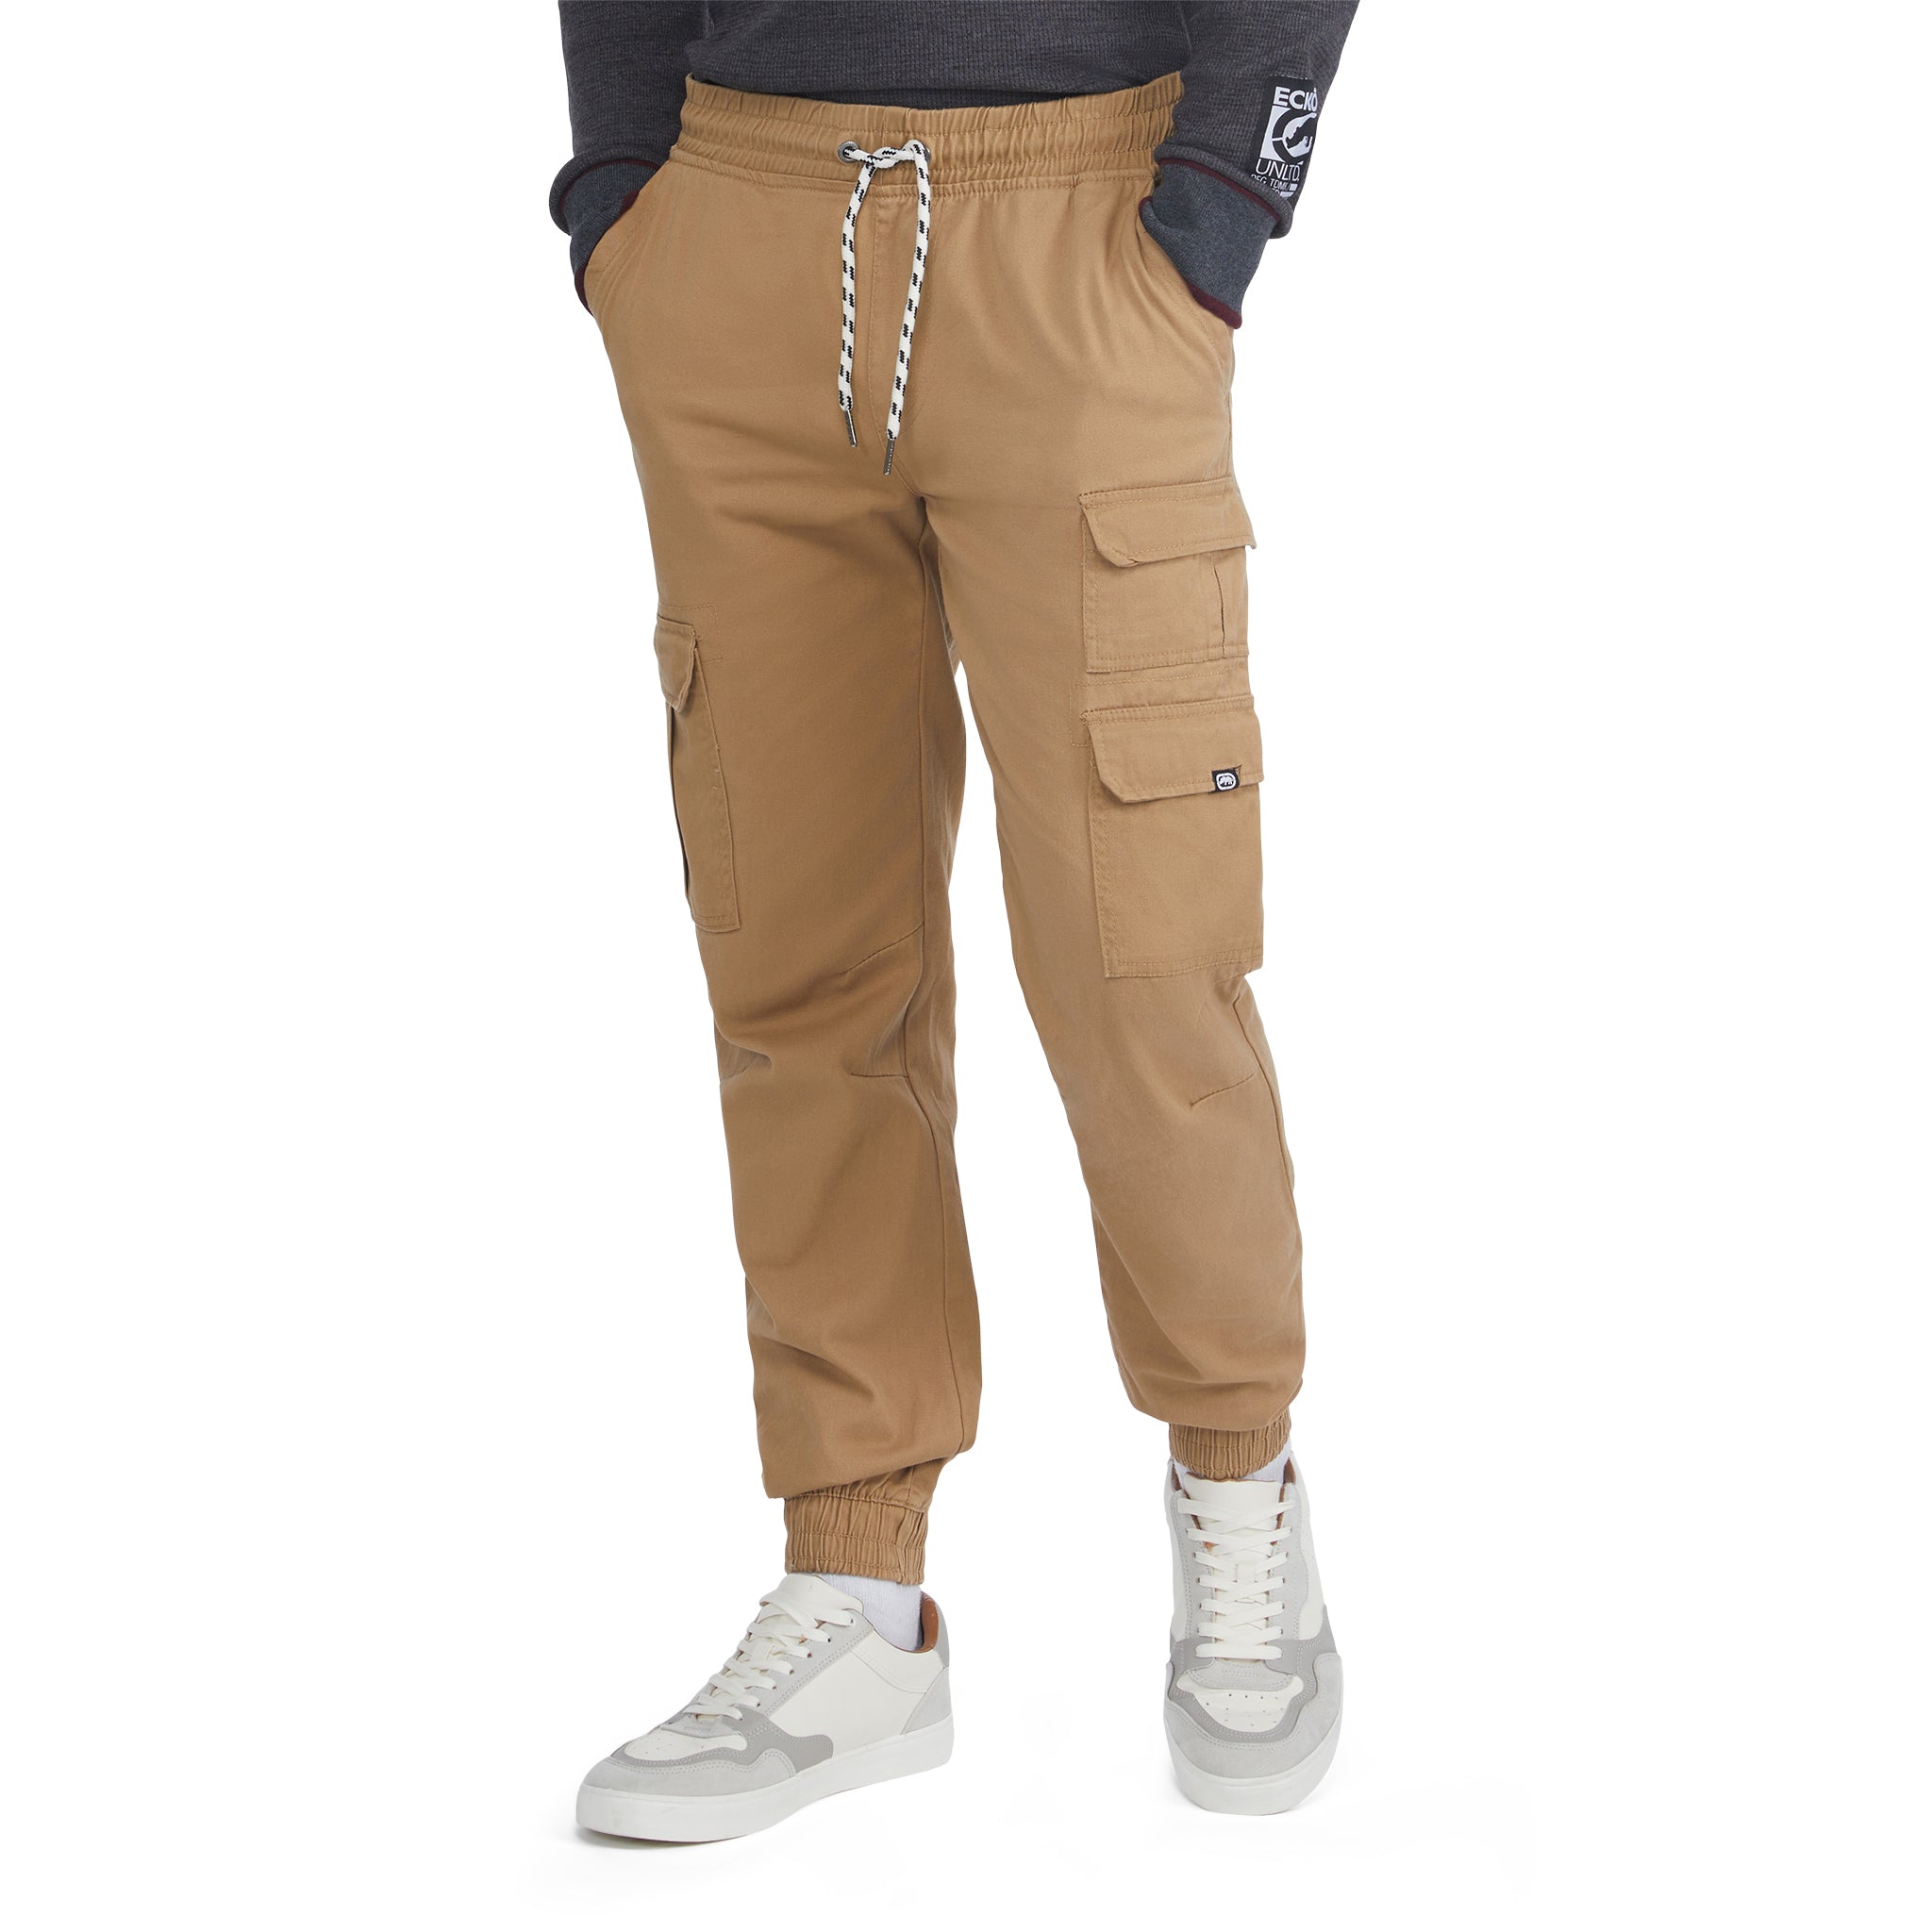 Buy Grey Trousers  Pants for Men by SNITCH Online  Ajiocom